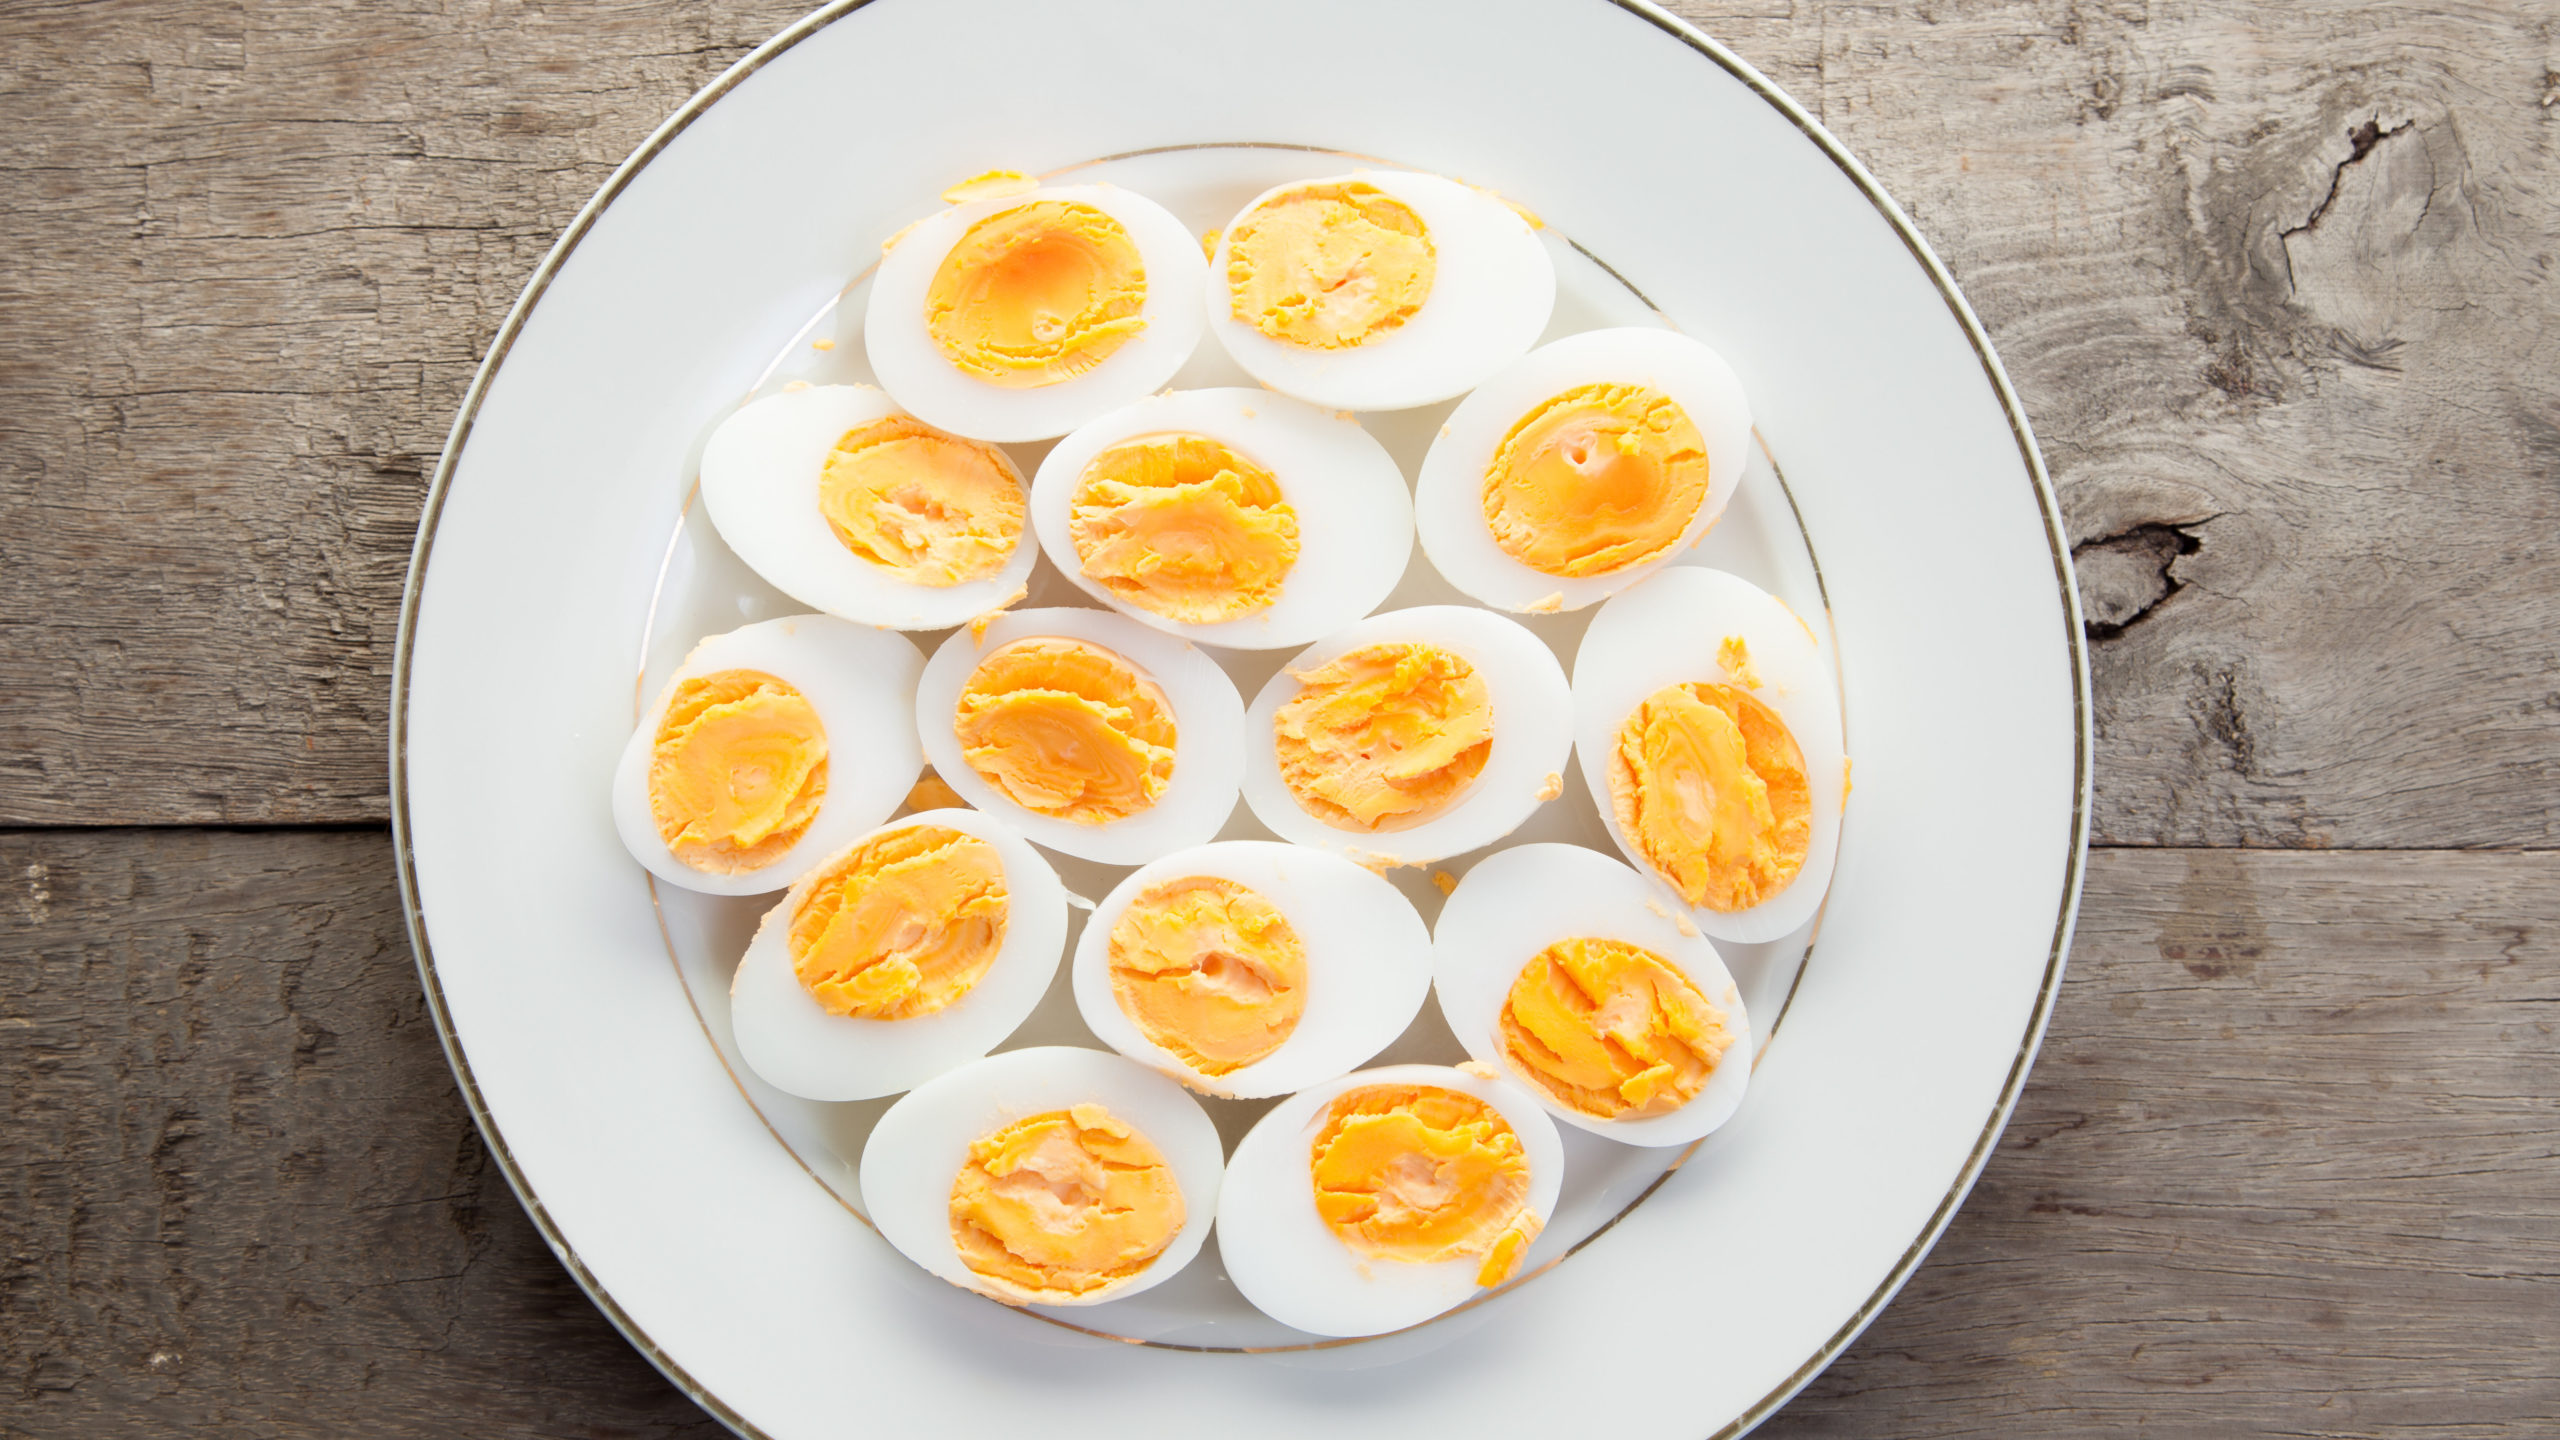 Actually, You Don’t Need to ‘Shock’ Hard-Boiled Eggs in Ice Water